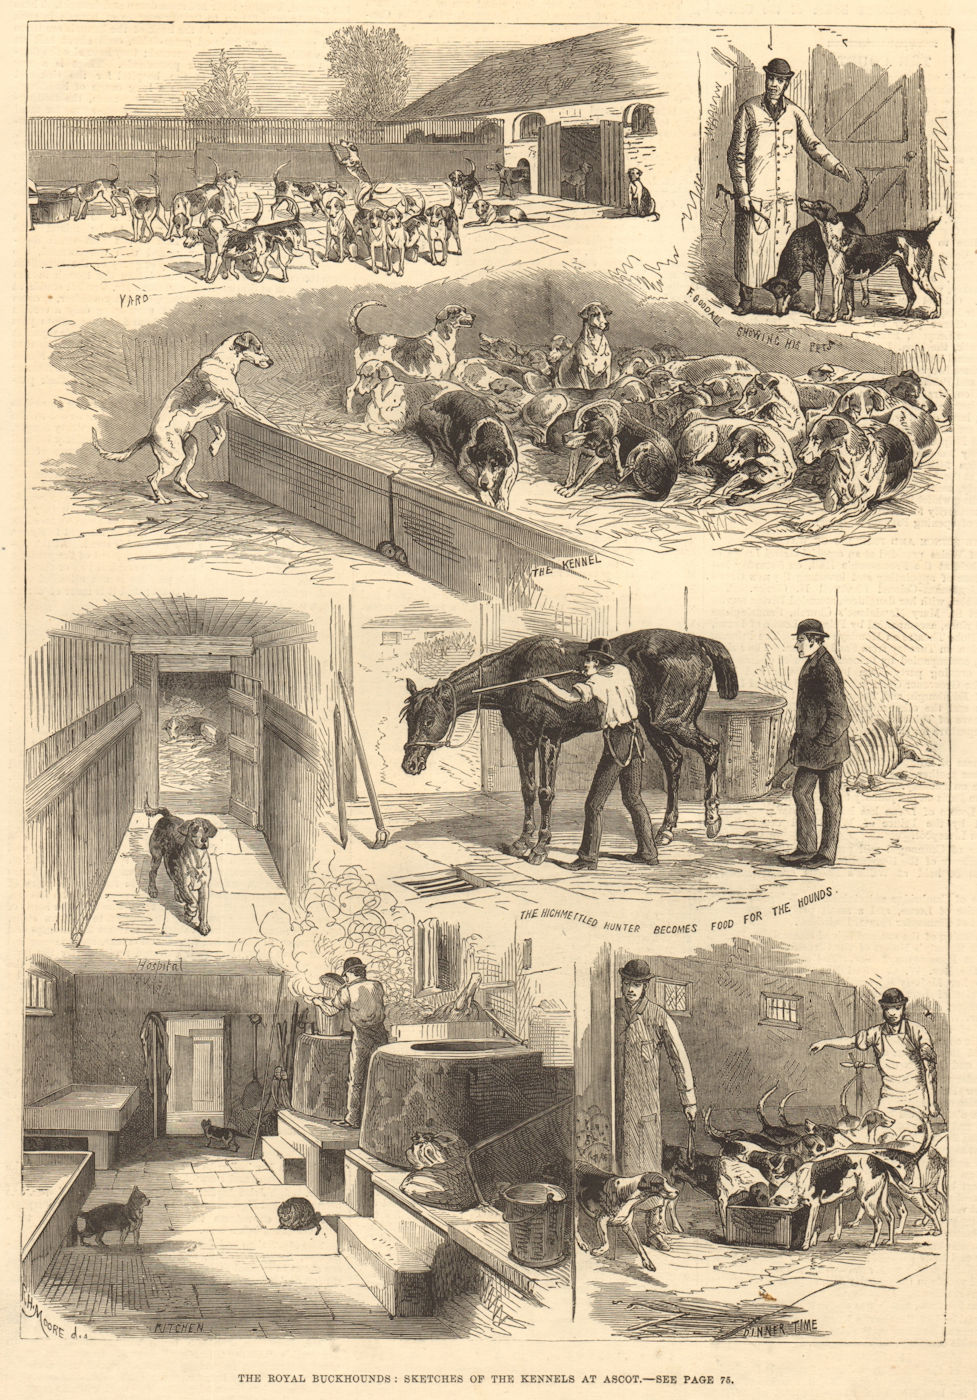 The royal buckhounds: Sketches of the kennels at Ascot. Berkshire. Dogs 1880